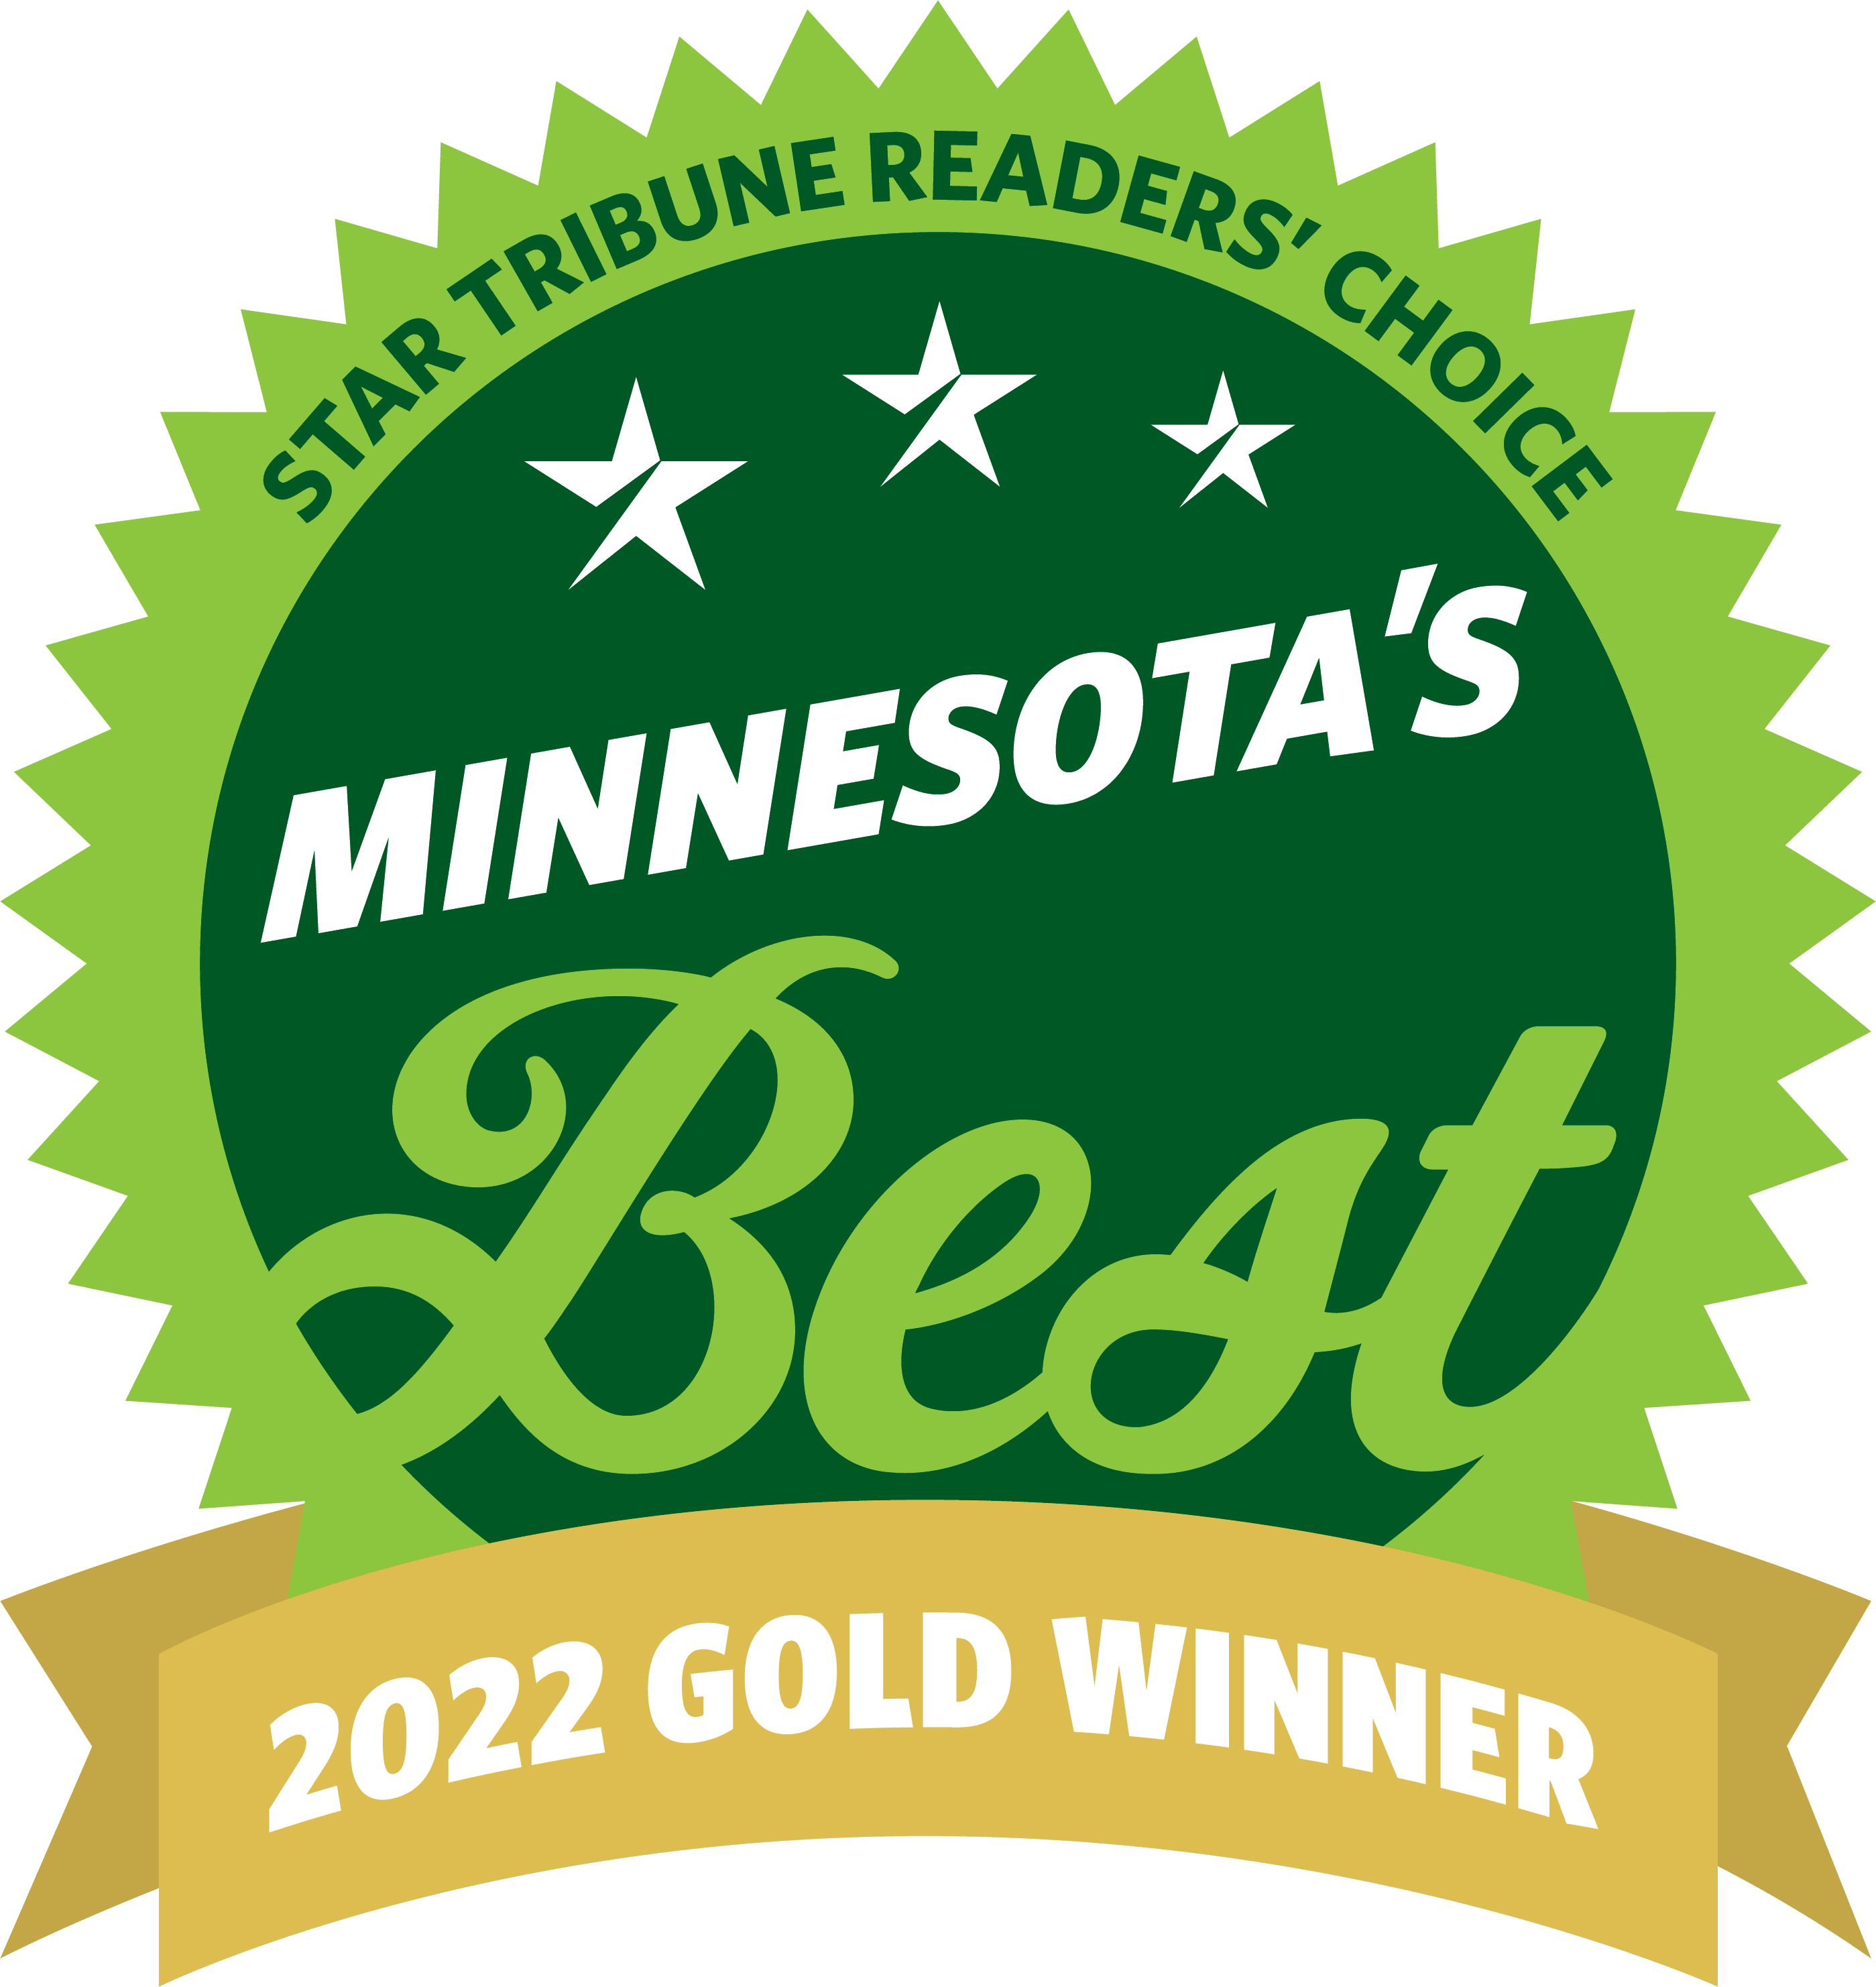 Minnesota Best Award for Applewood Pointe of Shoreview 